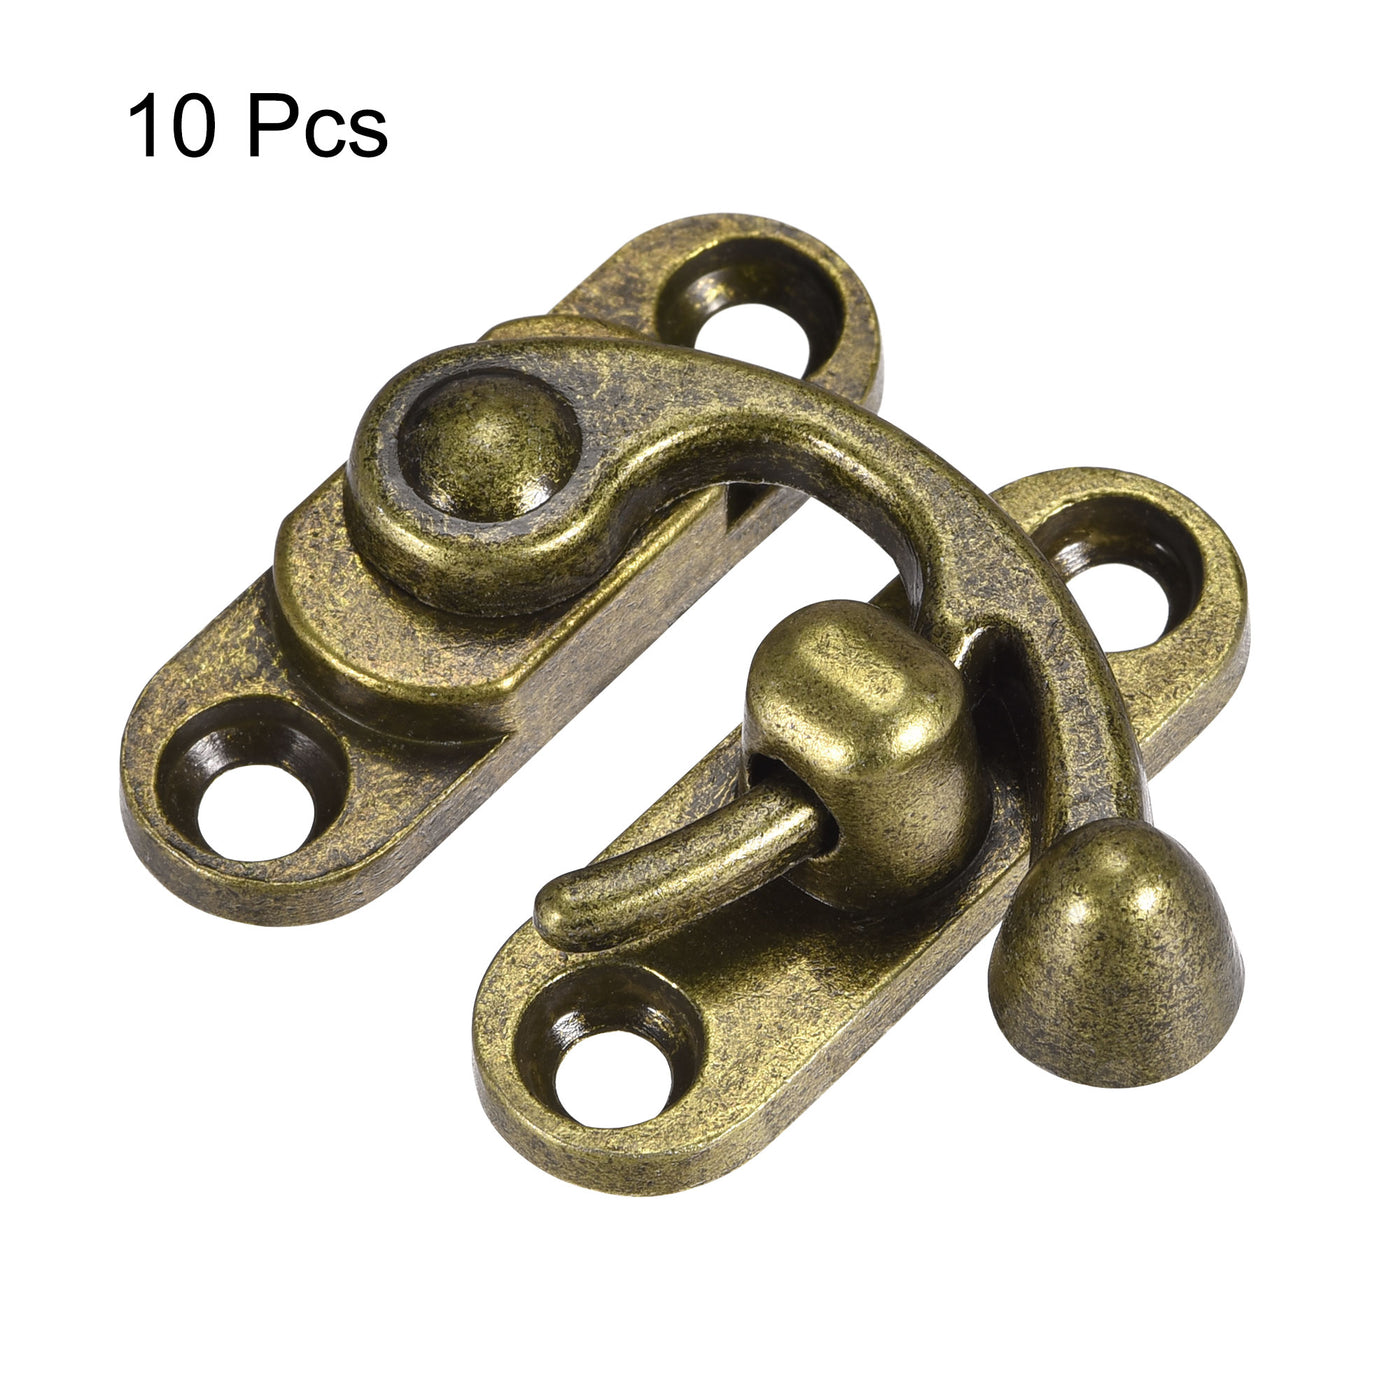 uxcell Uxcell Antique Vintage Lock Clasp Right Latch Hook Hasp 45mmx39mm Swing Arm Latch Bronze Tone 10 Pcs